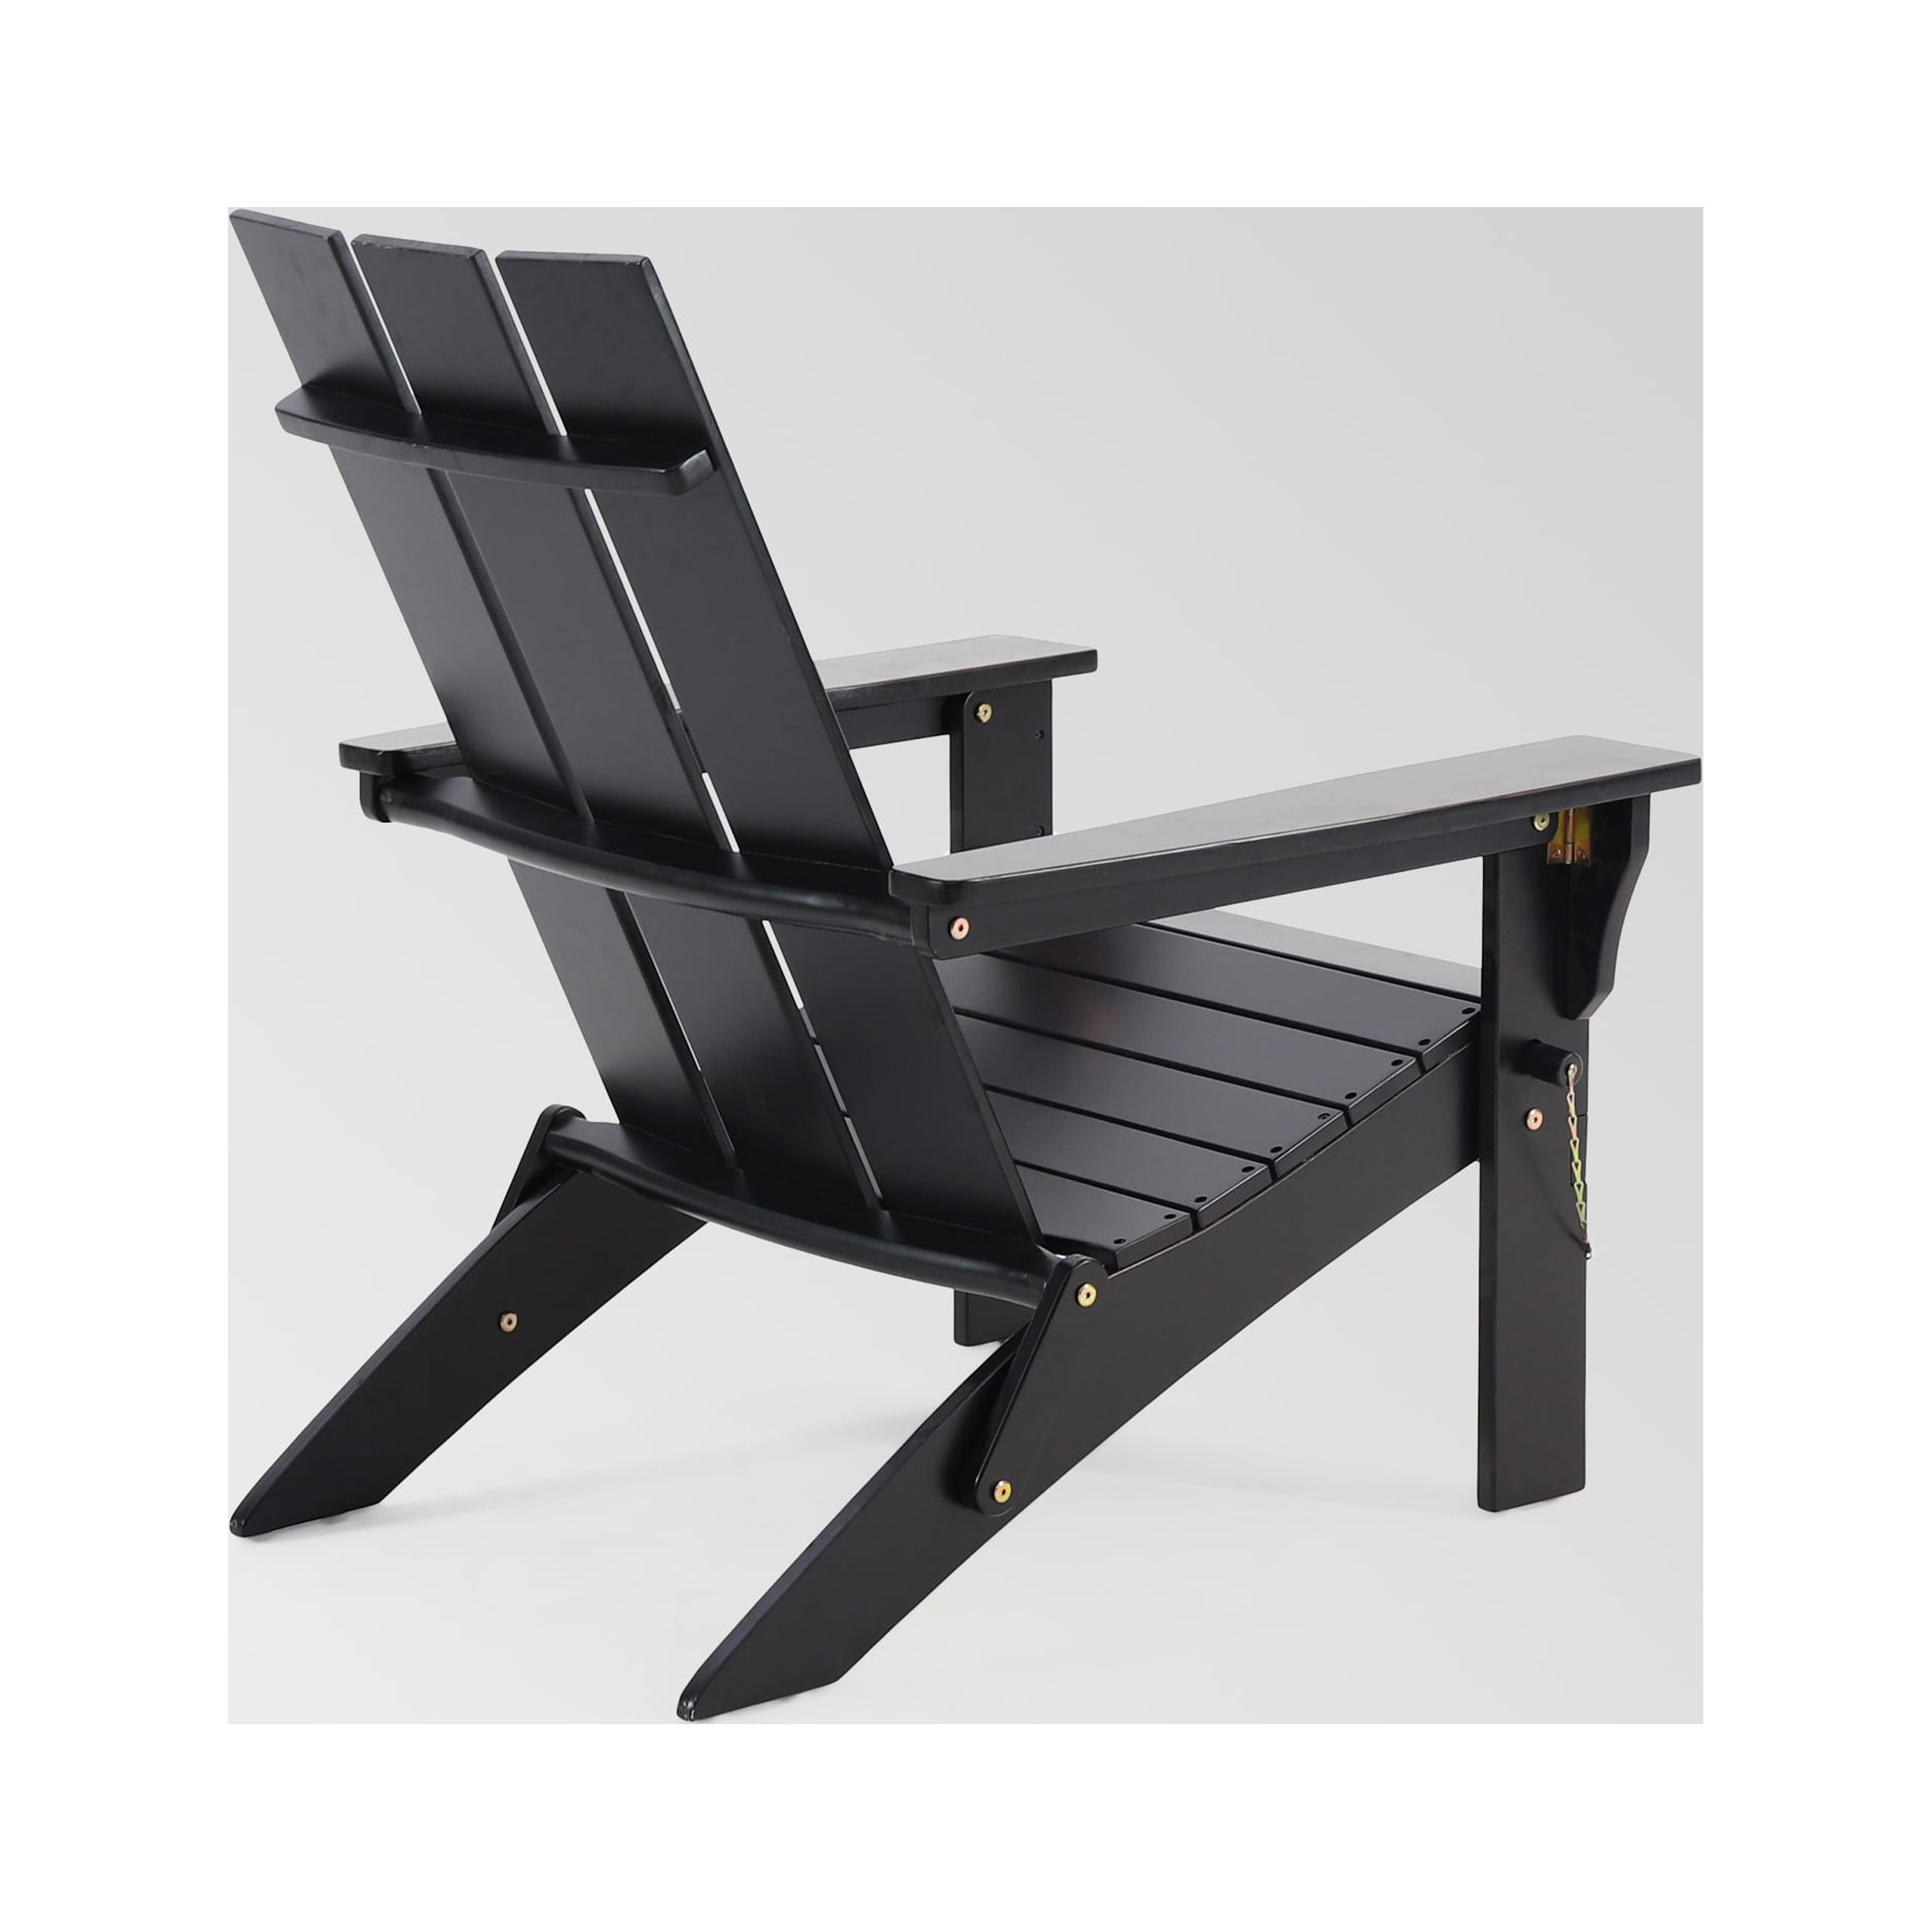 KUIKUI Outdoor Classic Pure Black Solid Wood Chair Garden Lounge Chair Foldable - image 3 of 7